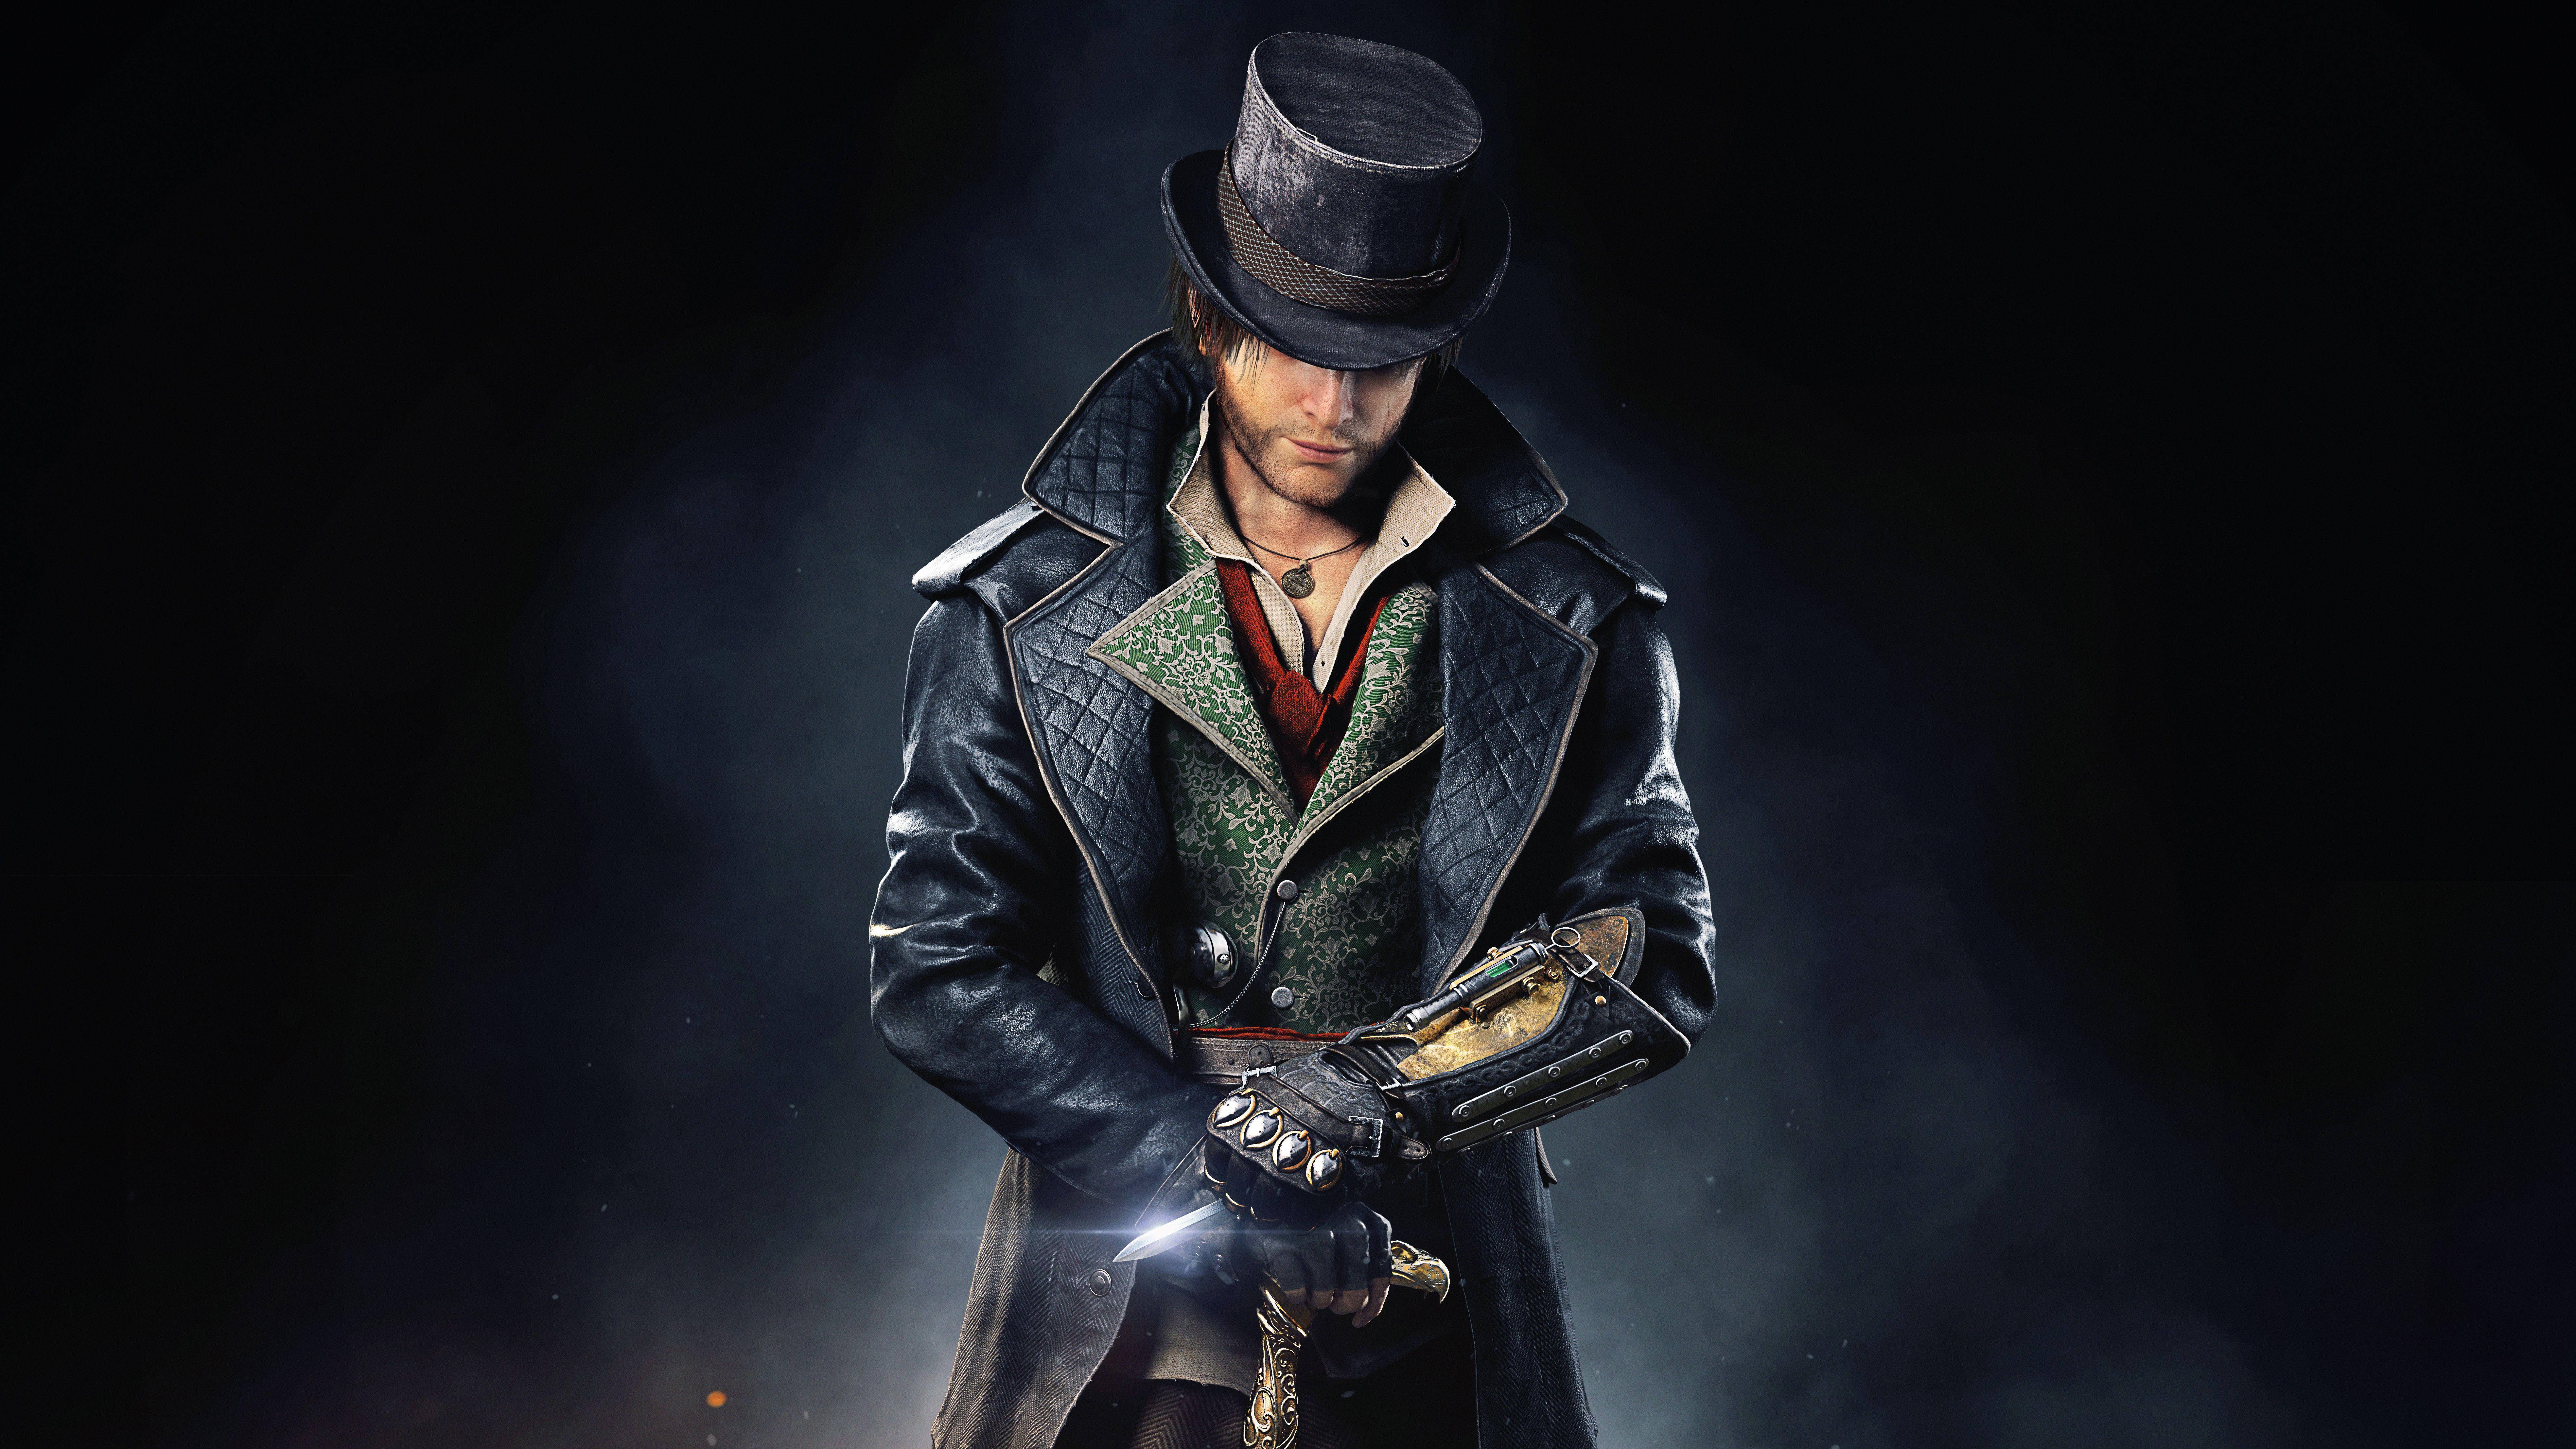 110 Assassin&Creed: Syndicate HD Wallpapers